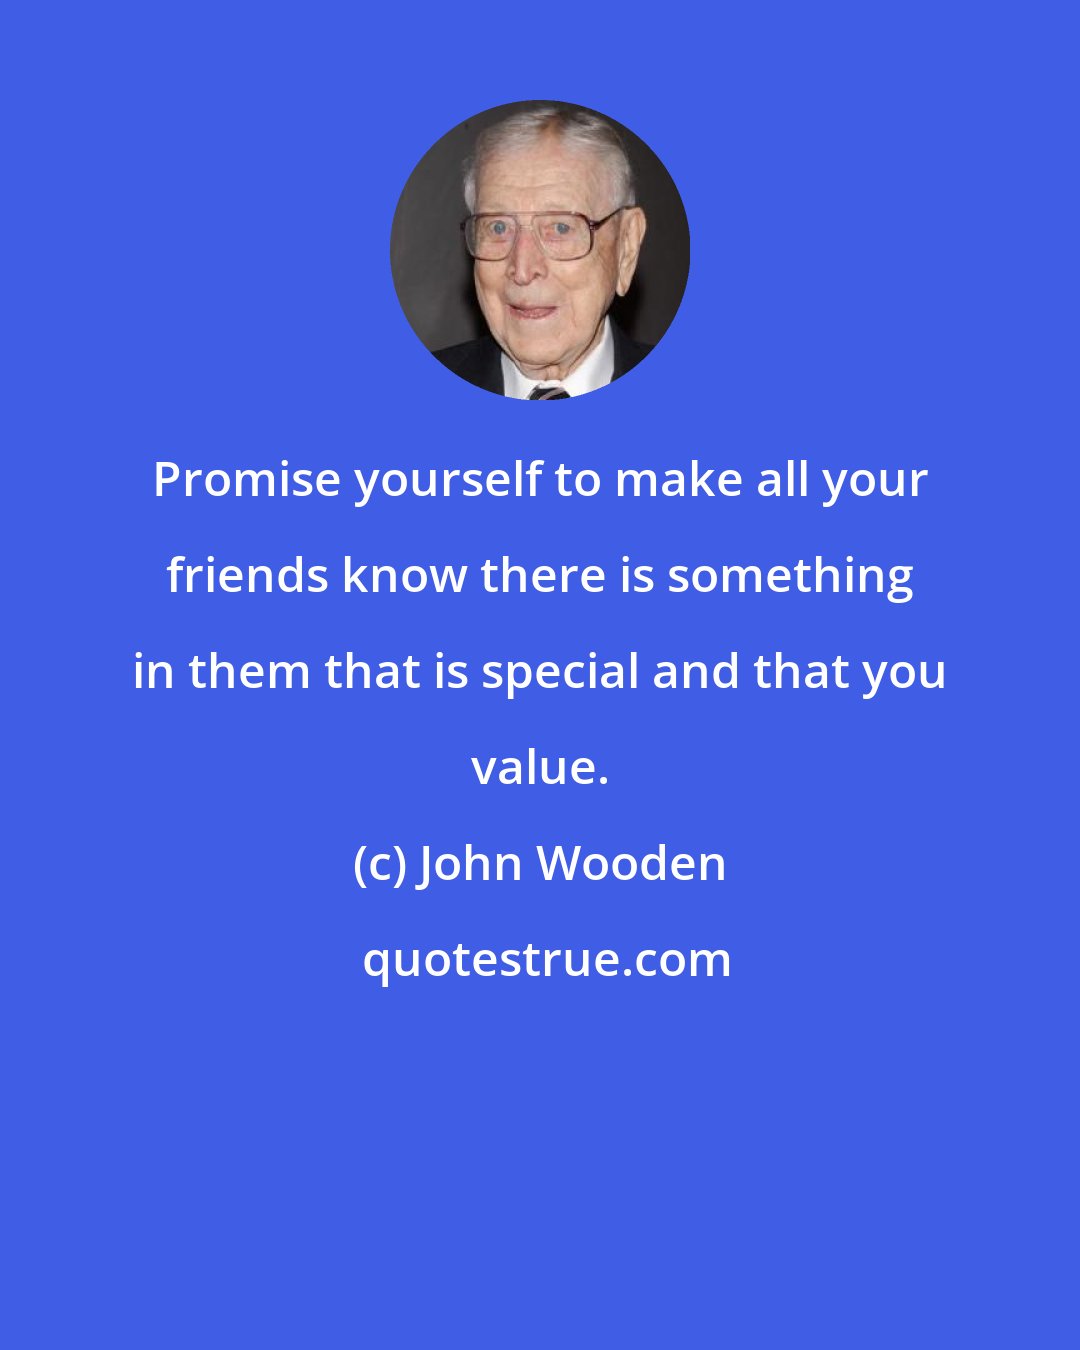 John Wooden: Promise yourself to make all your friends know there is something in them that is special and that you value.